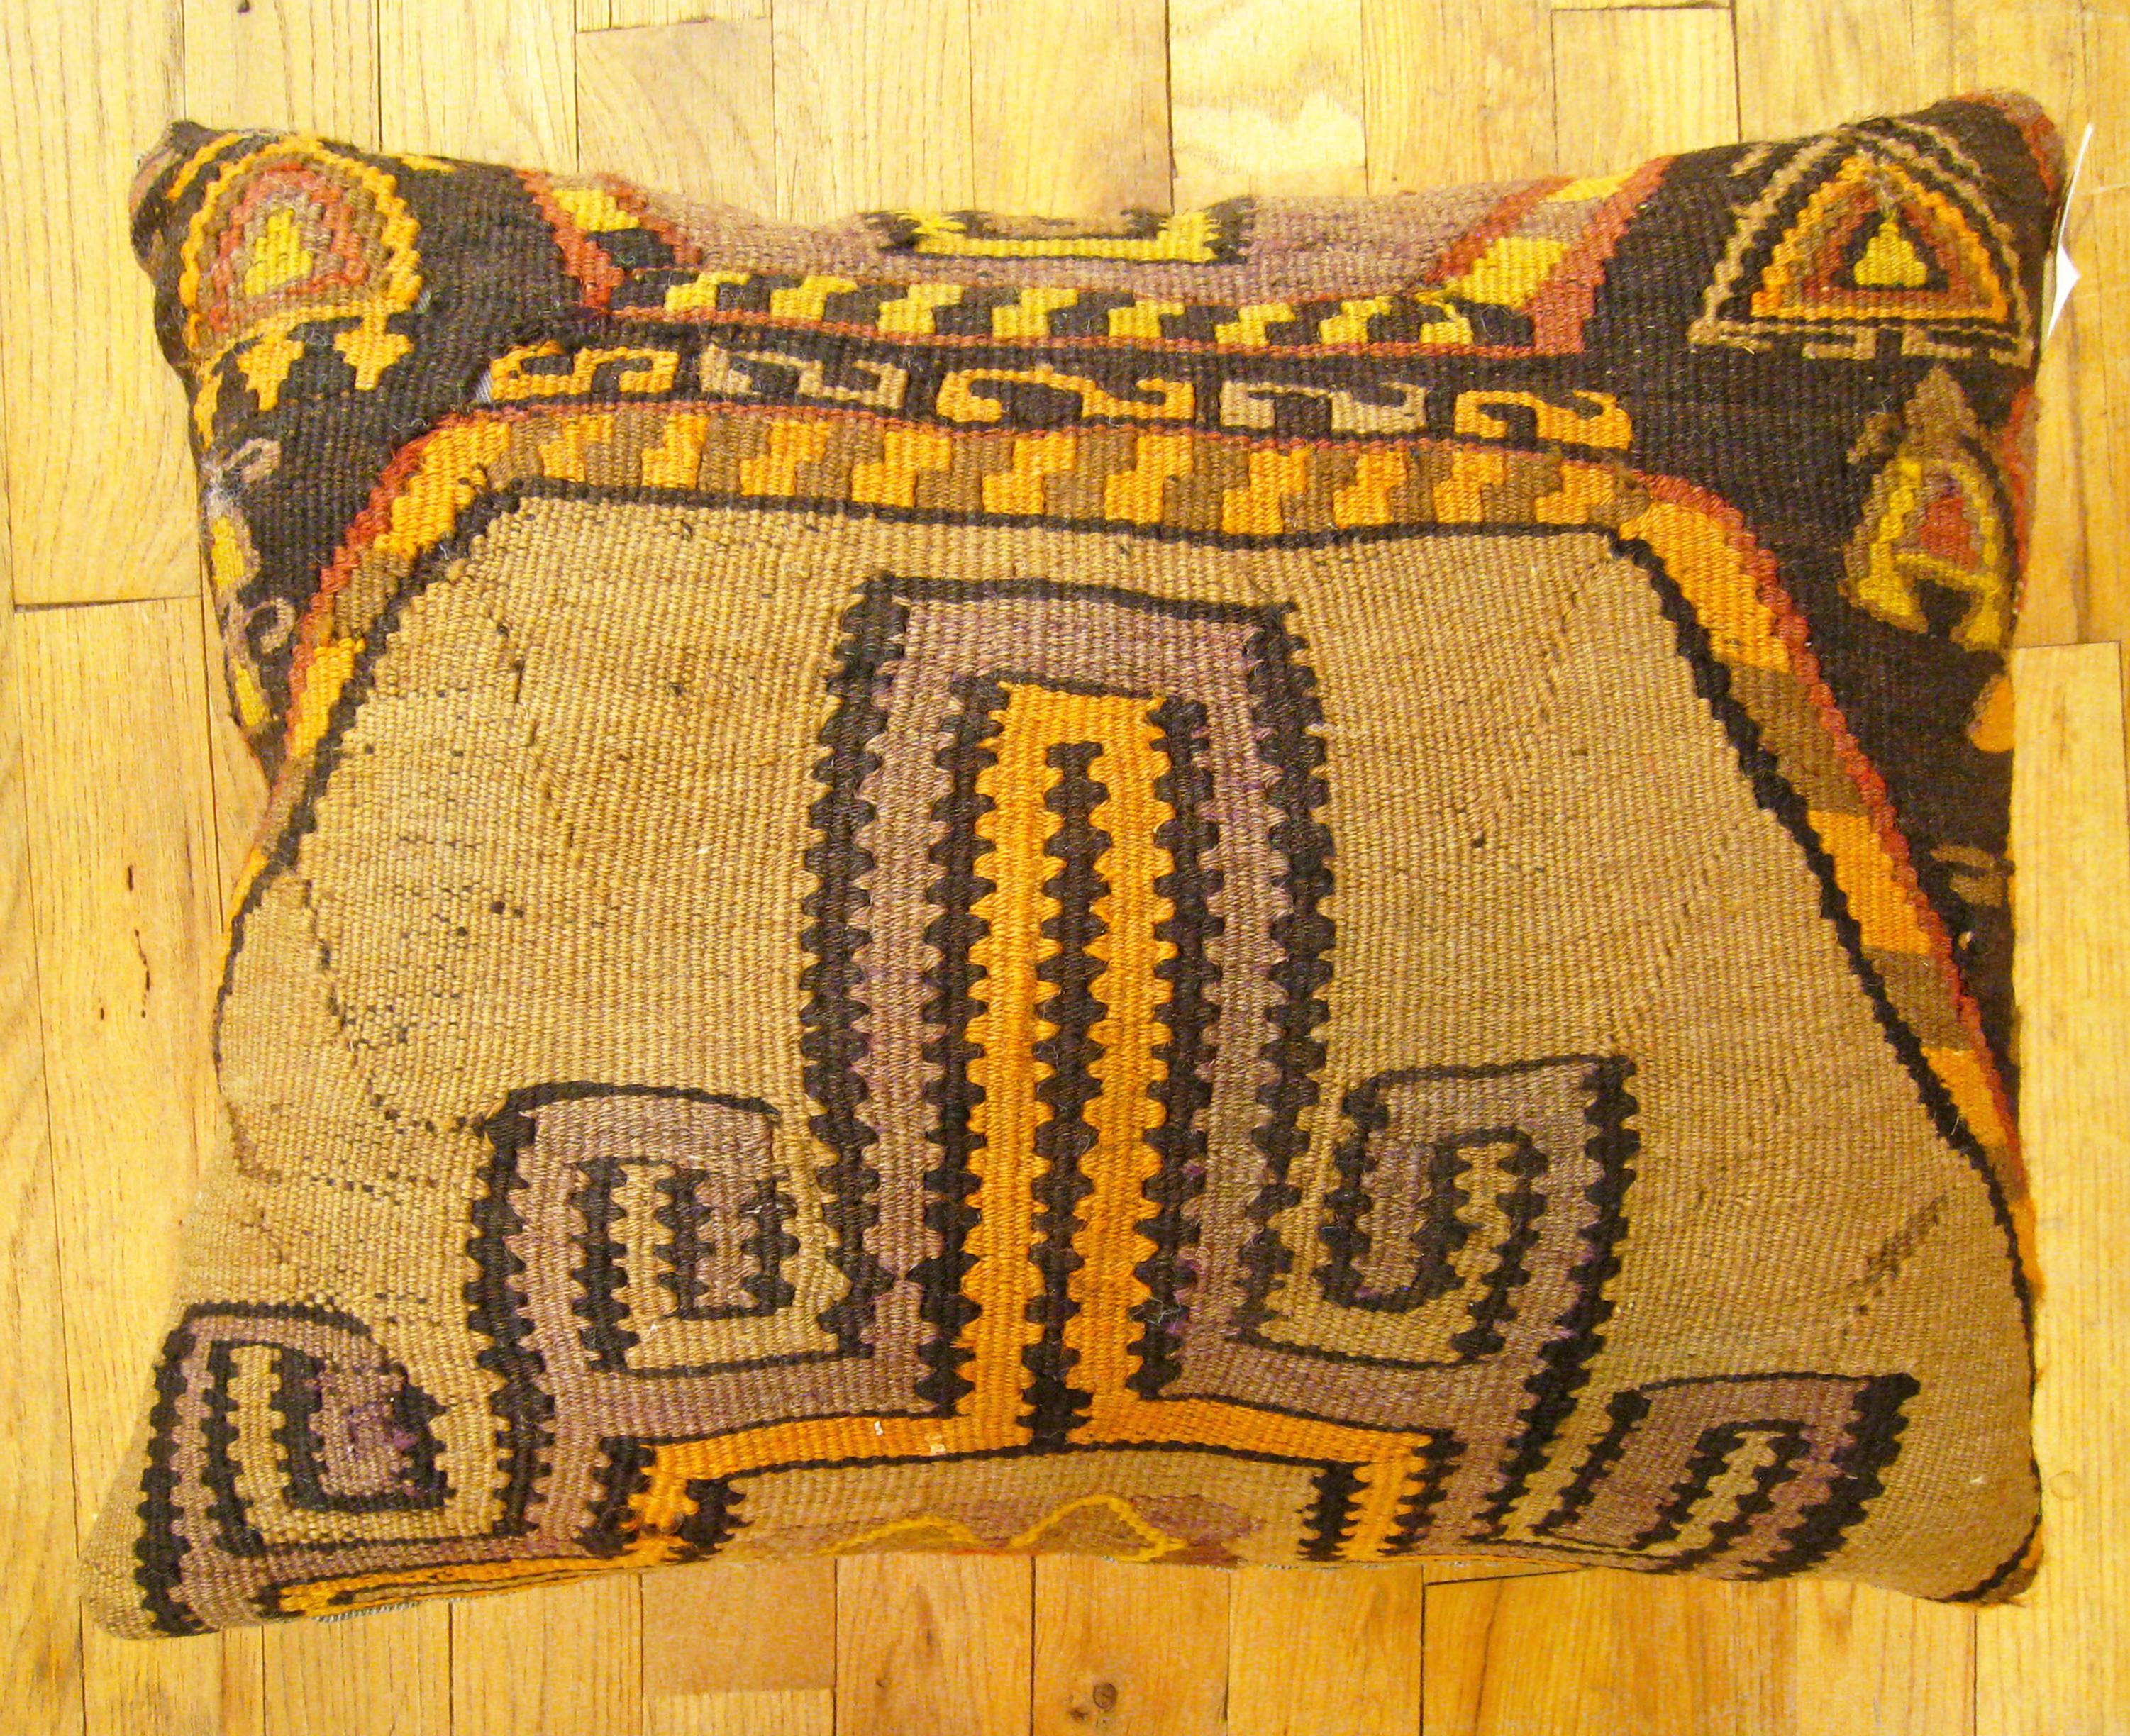 Vintage Turkish Kilim Rug Pillow; size 22” x 18”.

A vintage decorative pillow with geometric abstracts allover a brown central field, size 22” x 18”. This lovely decorative pillow features a vintage fabric of a KIilim carpet on front which is